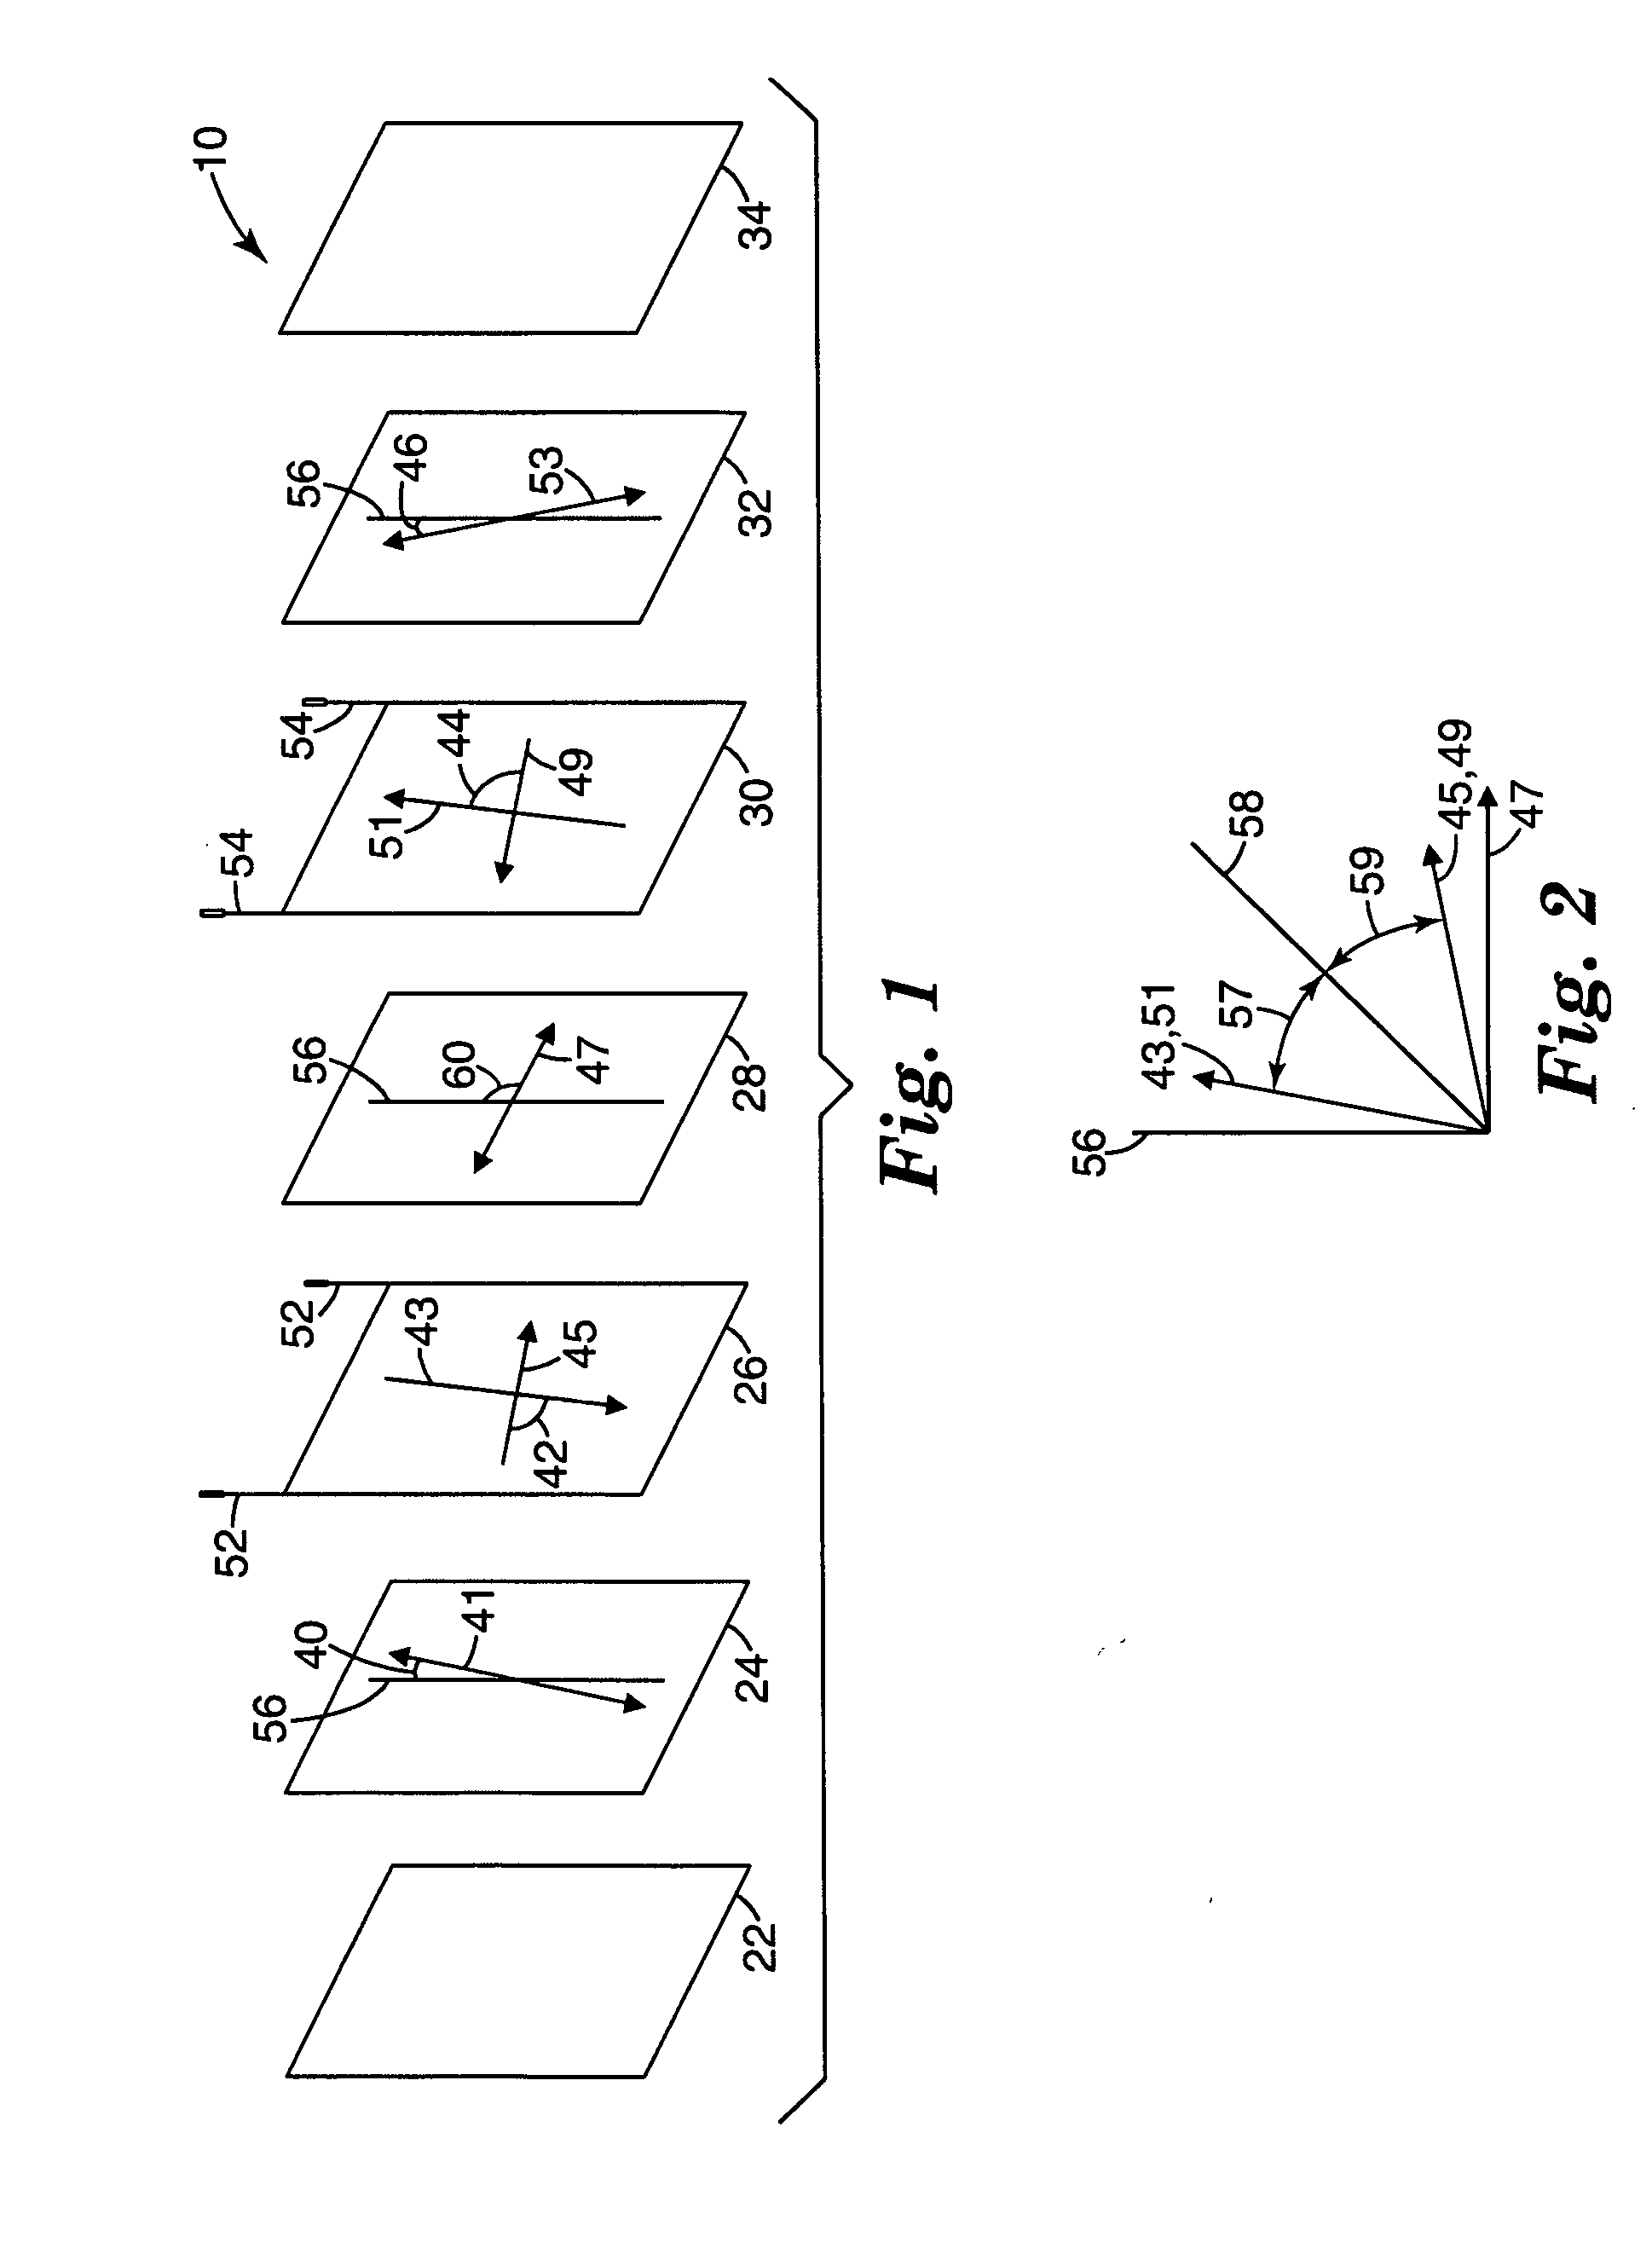 Automatic darkening filter with offset polarizers